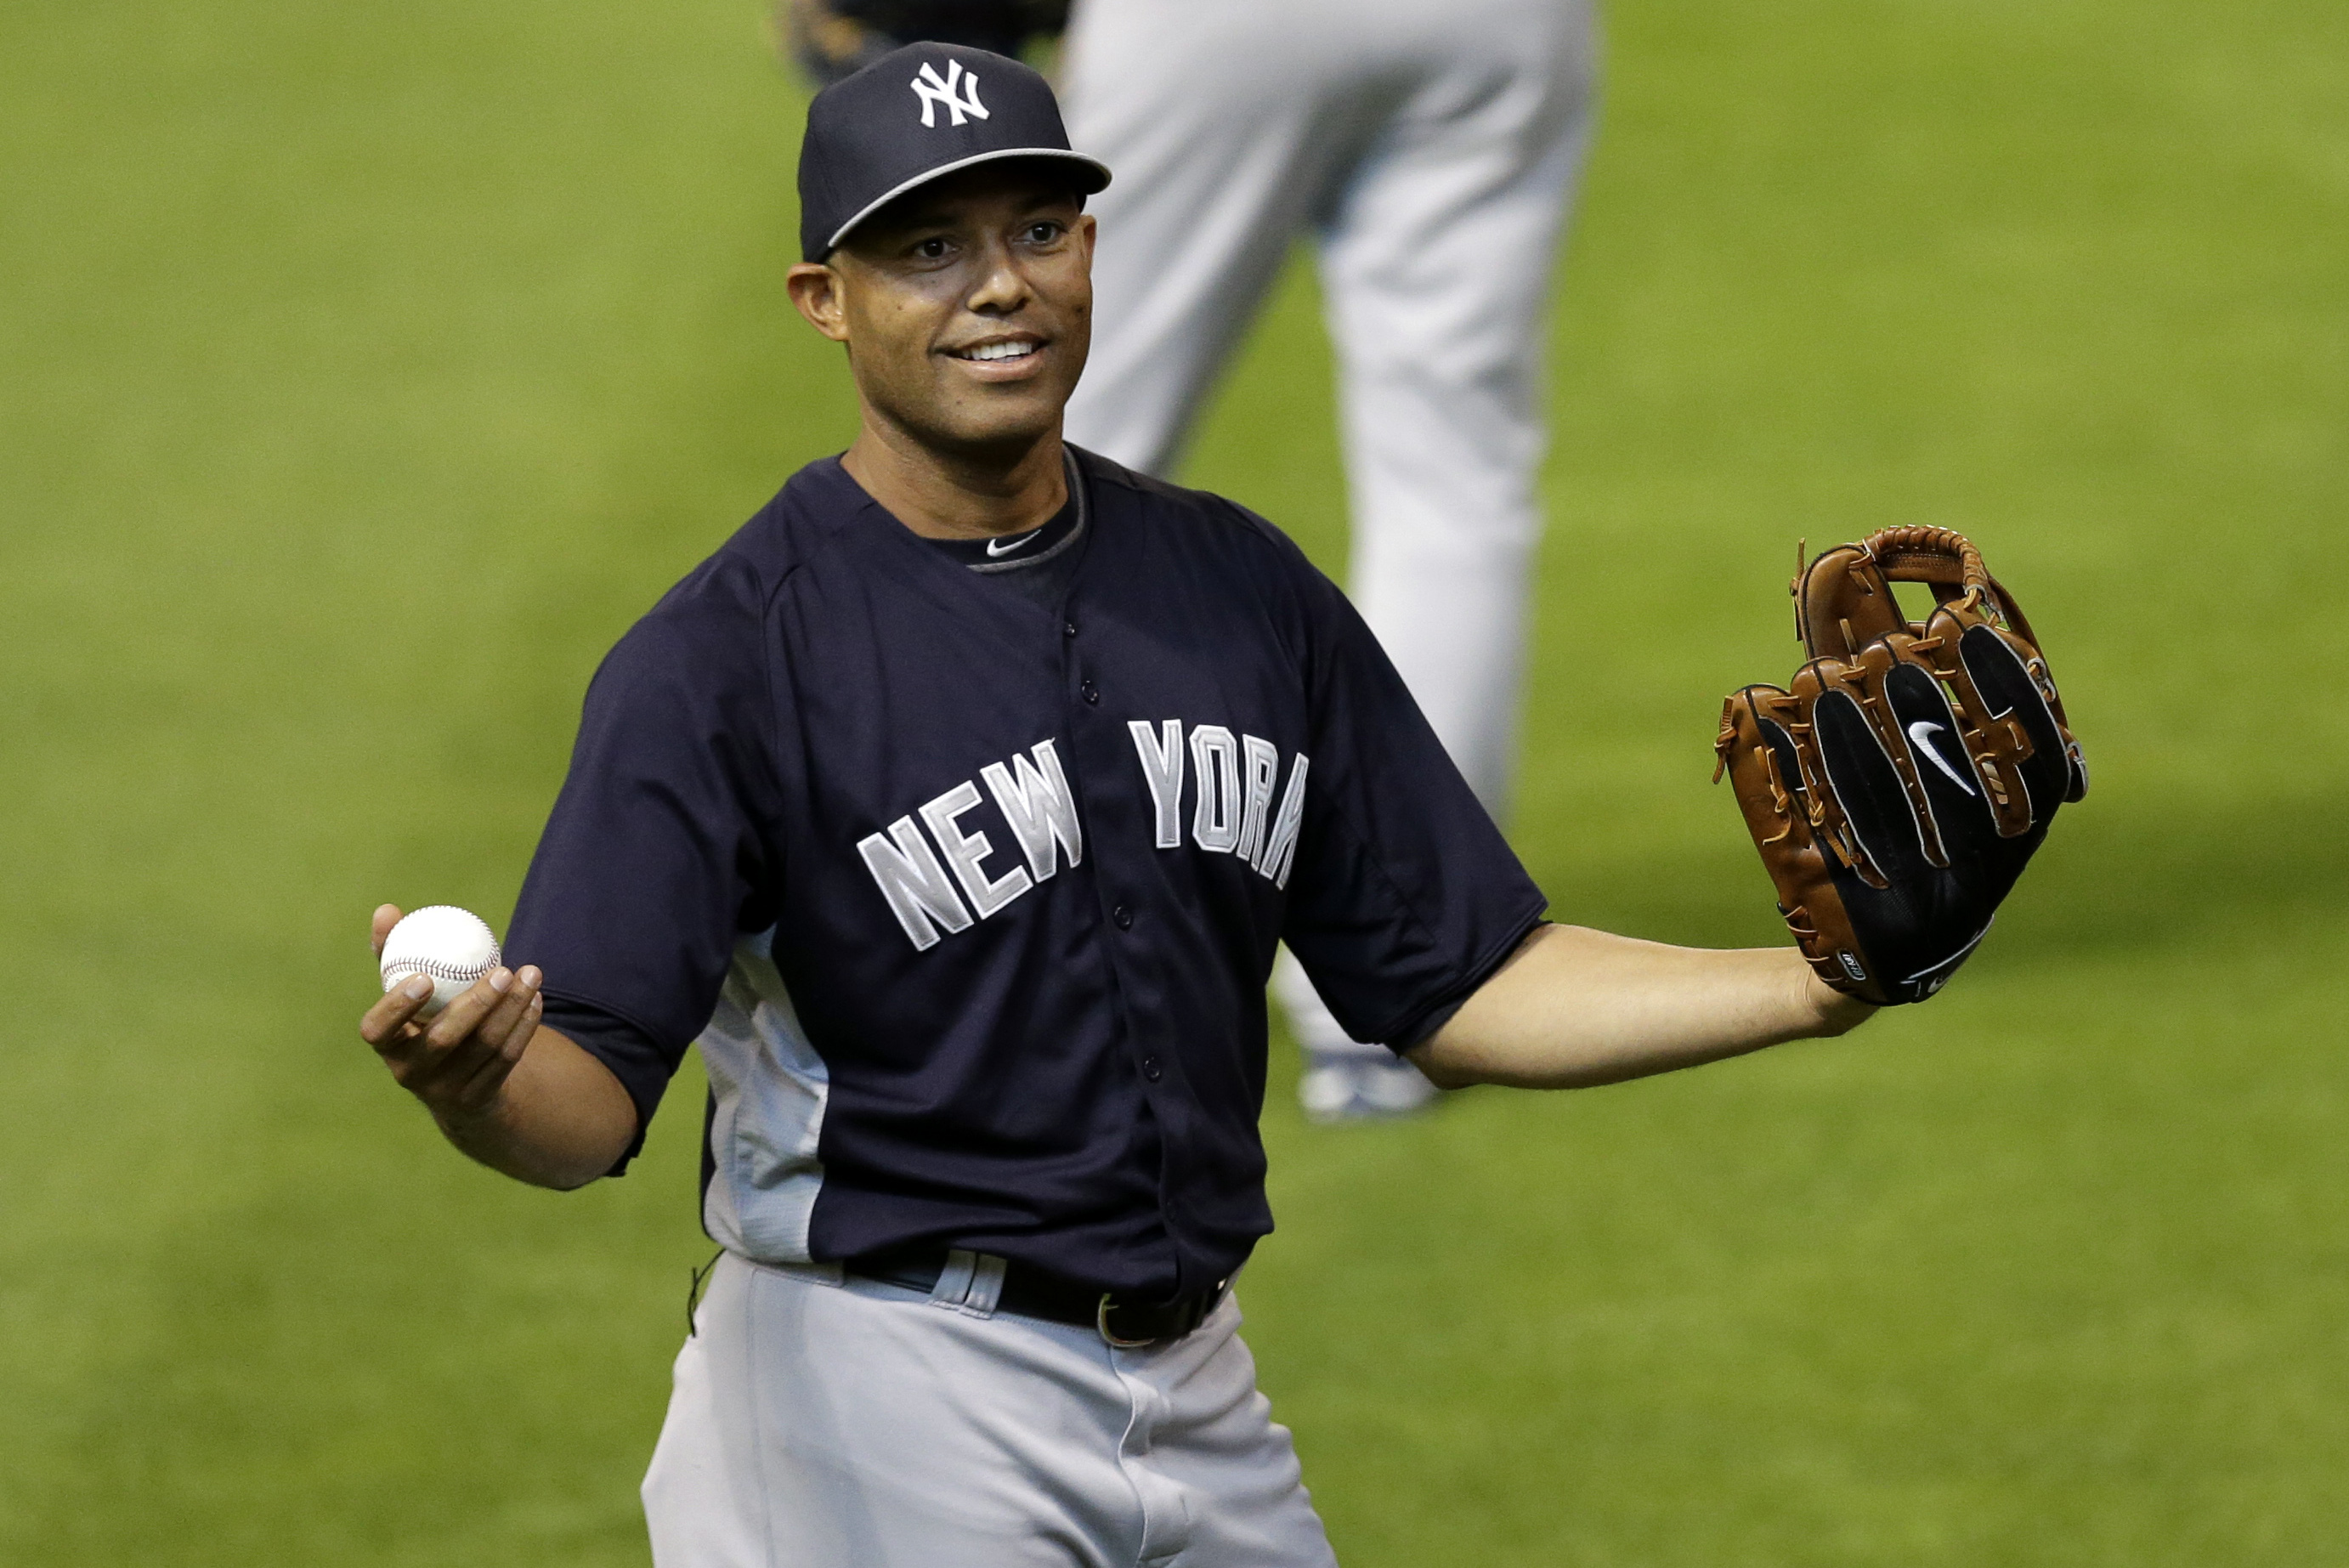 Mariano Rivera Elected Unanimously to Baseball Hall of Fame - WSJ